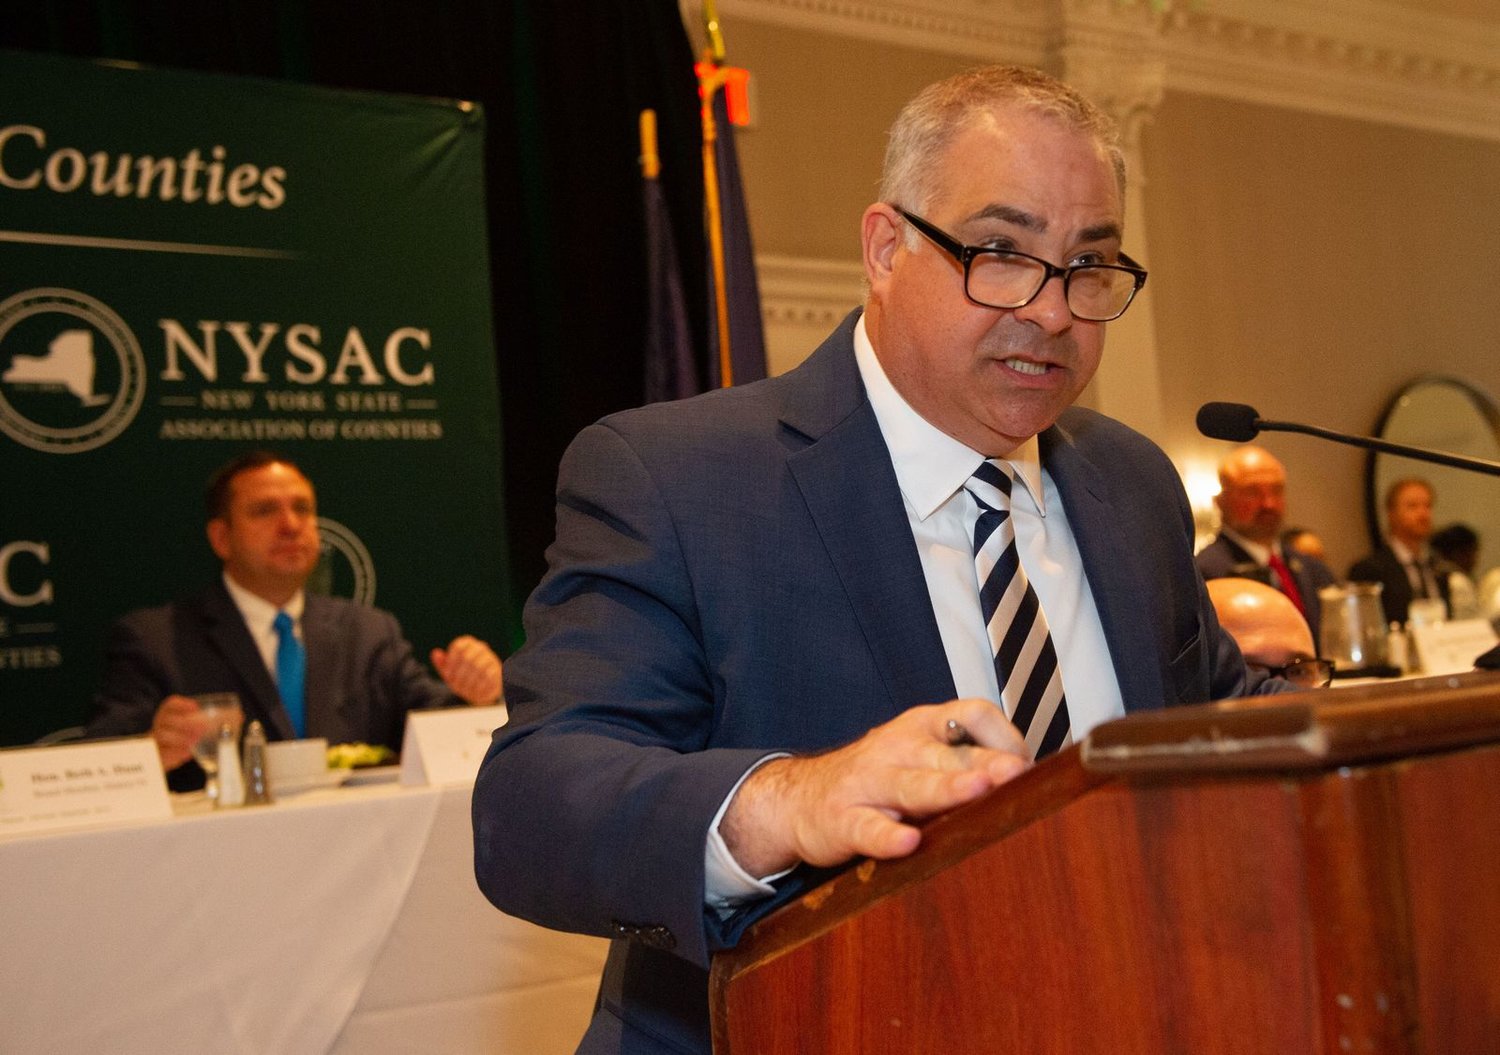 “The Governor's plan to shift $625 million onto local property taxpayers would be so damaging to the residents we serve, and to affordability in New York State, that we felt we simply couldn't wait to make the county voice heard on this issue,” said NYSAC President and Clinton County Administrator Michael E. Zurlo.